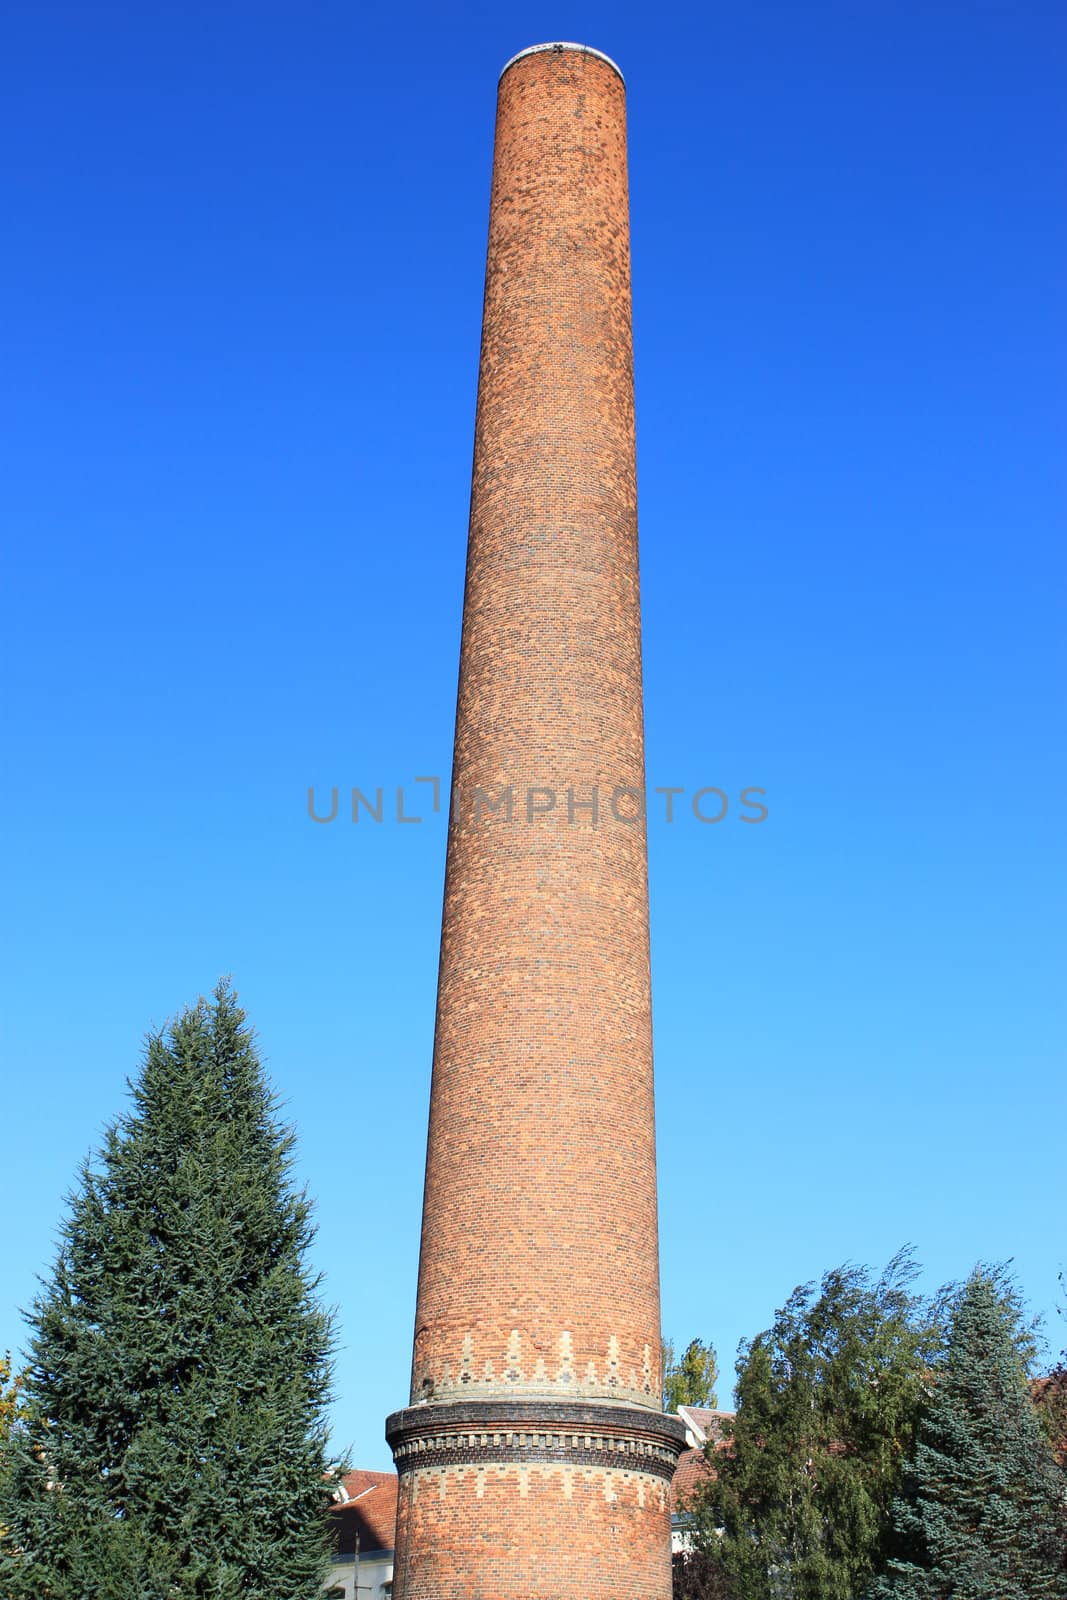 A large factory chimney built out of bricks